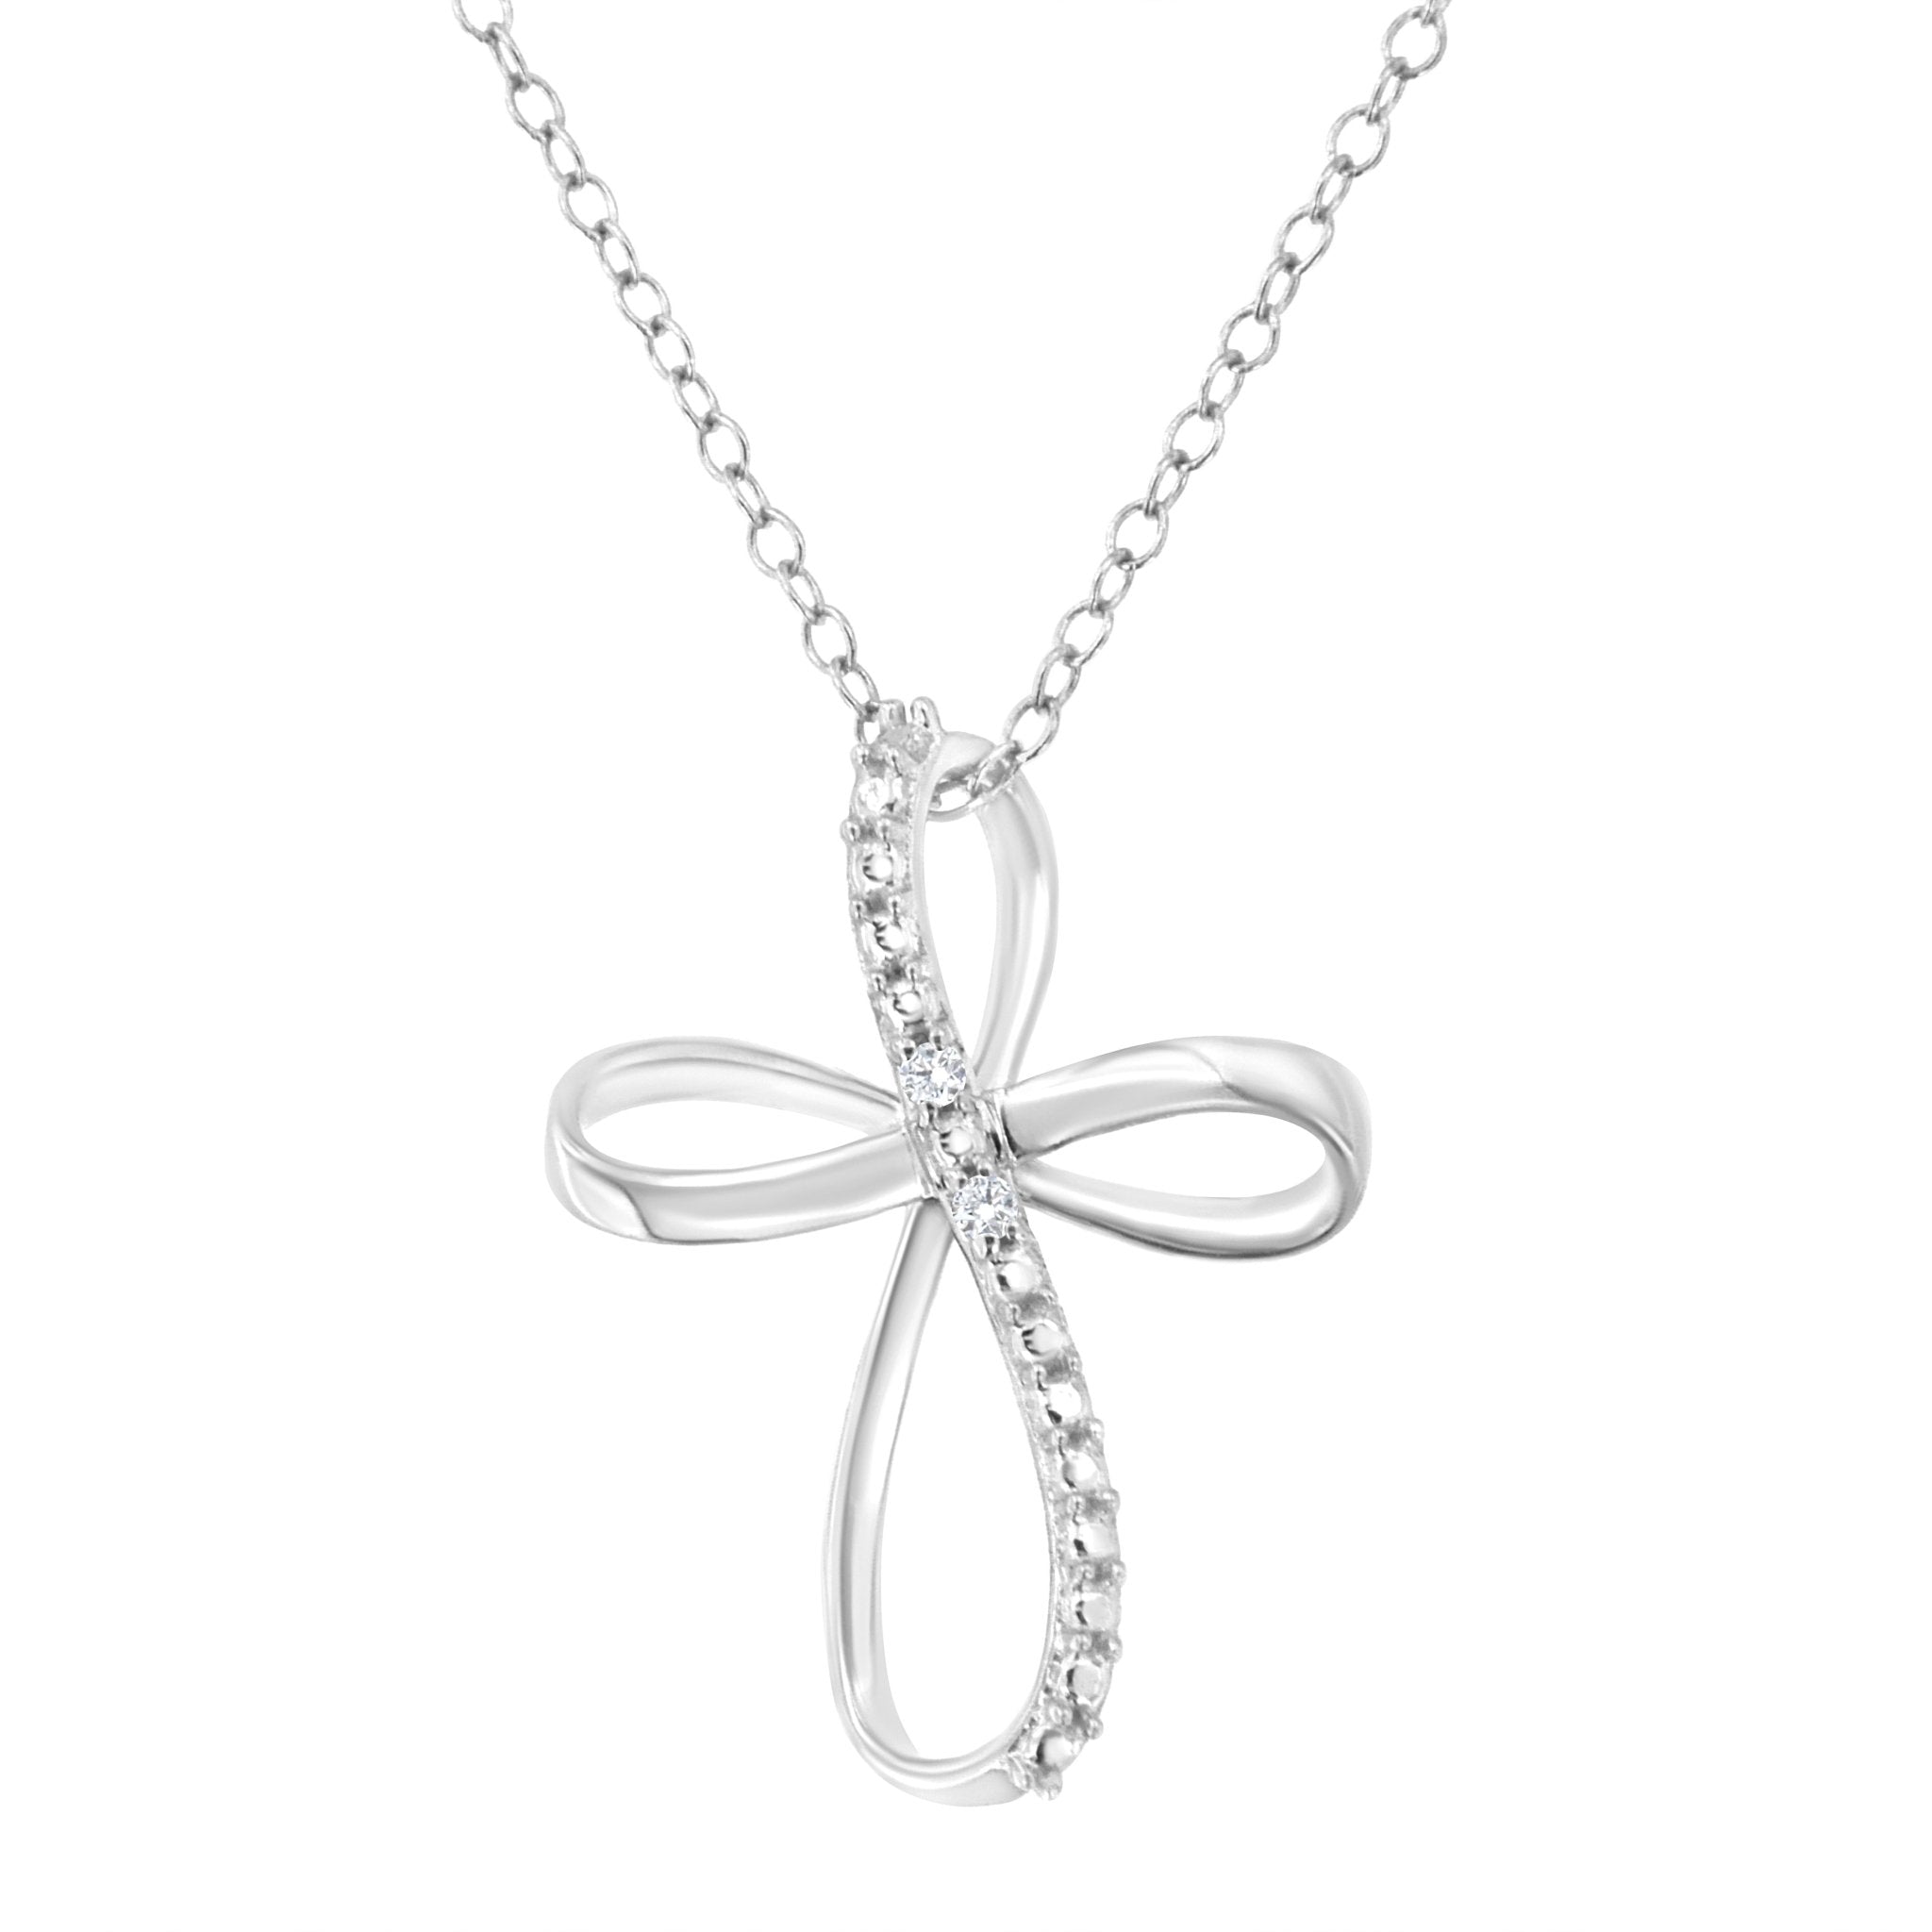 .925 Sterling Silver Diamond Accent Cross Ribbon 18" Pendant Necklace (I-J Color, I2-I3 Clarity) - Tuesday Morning-Pendant Necklace